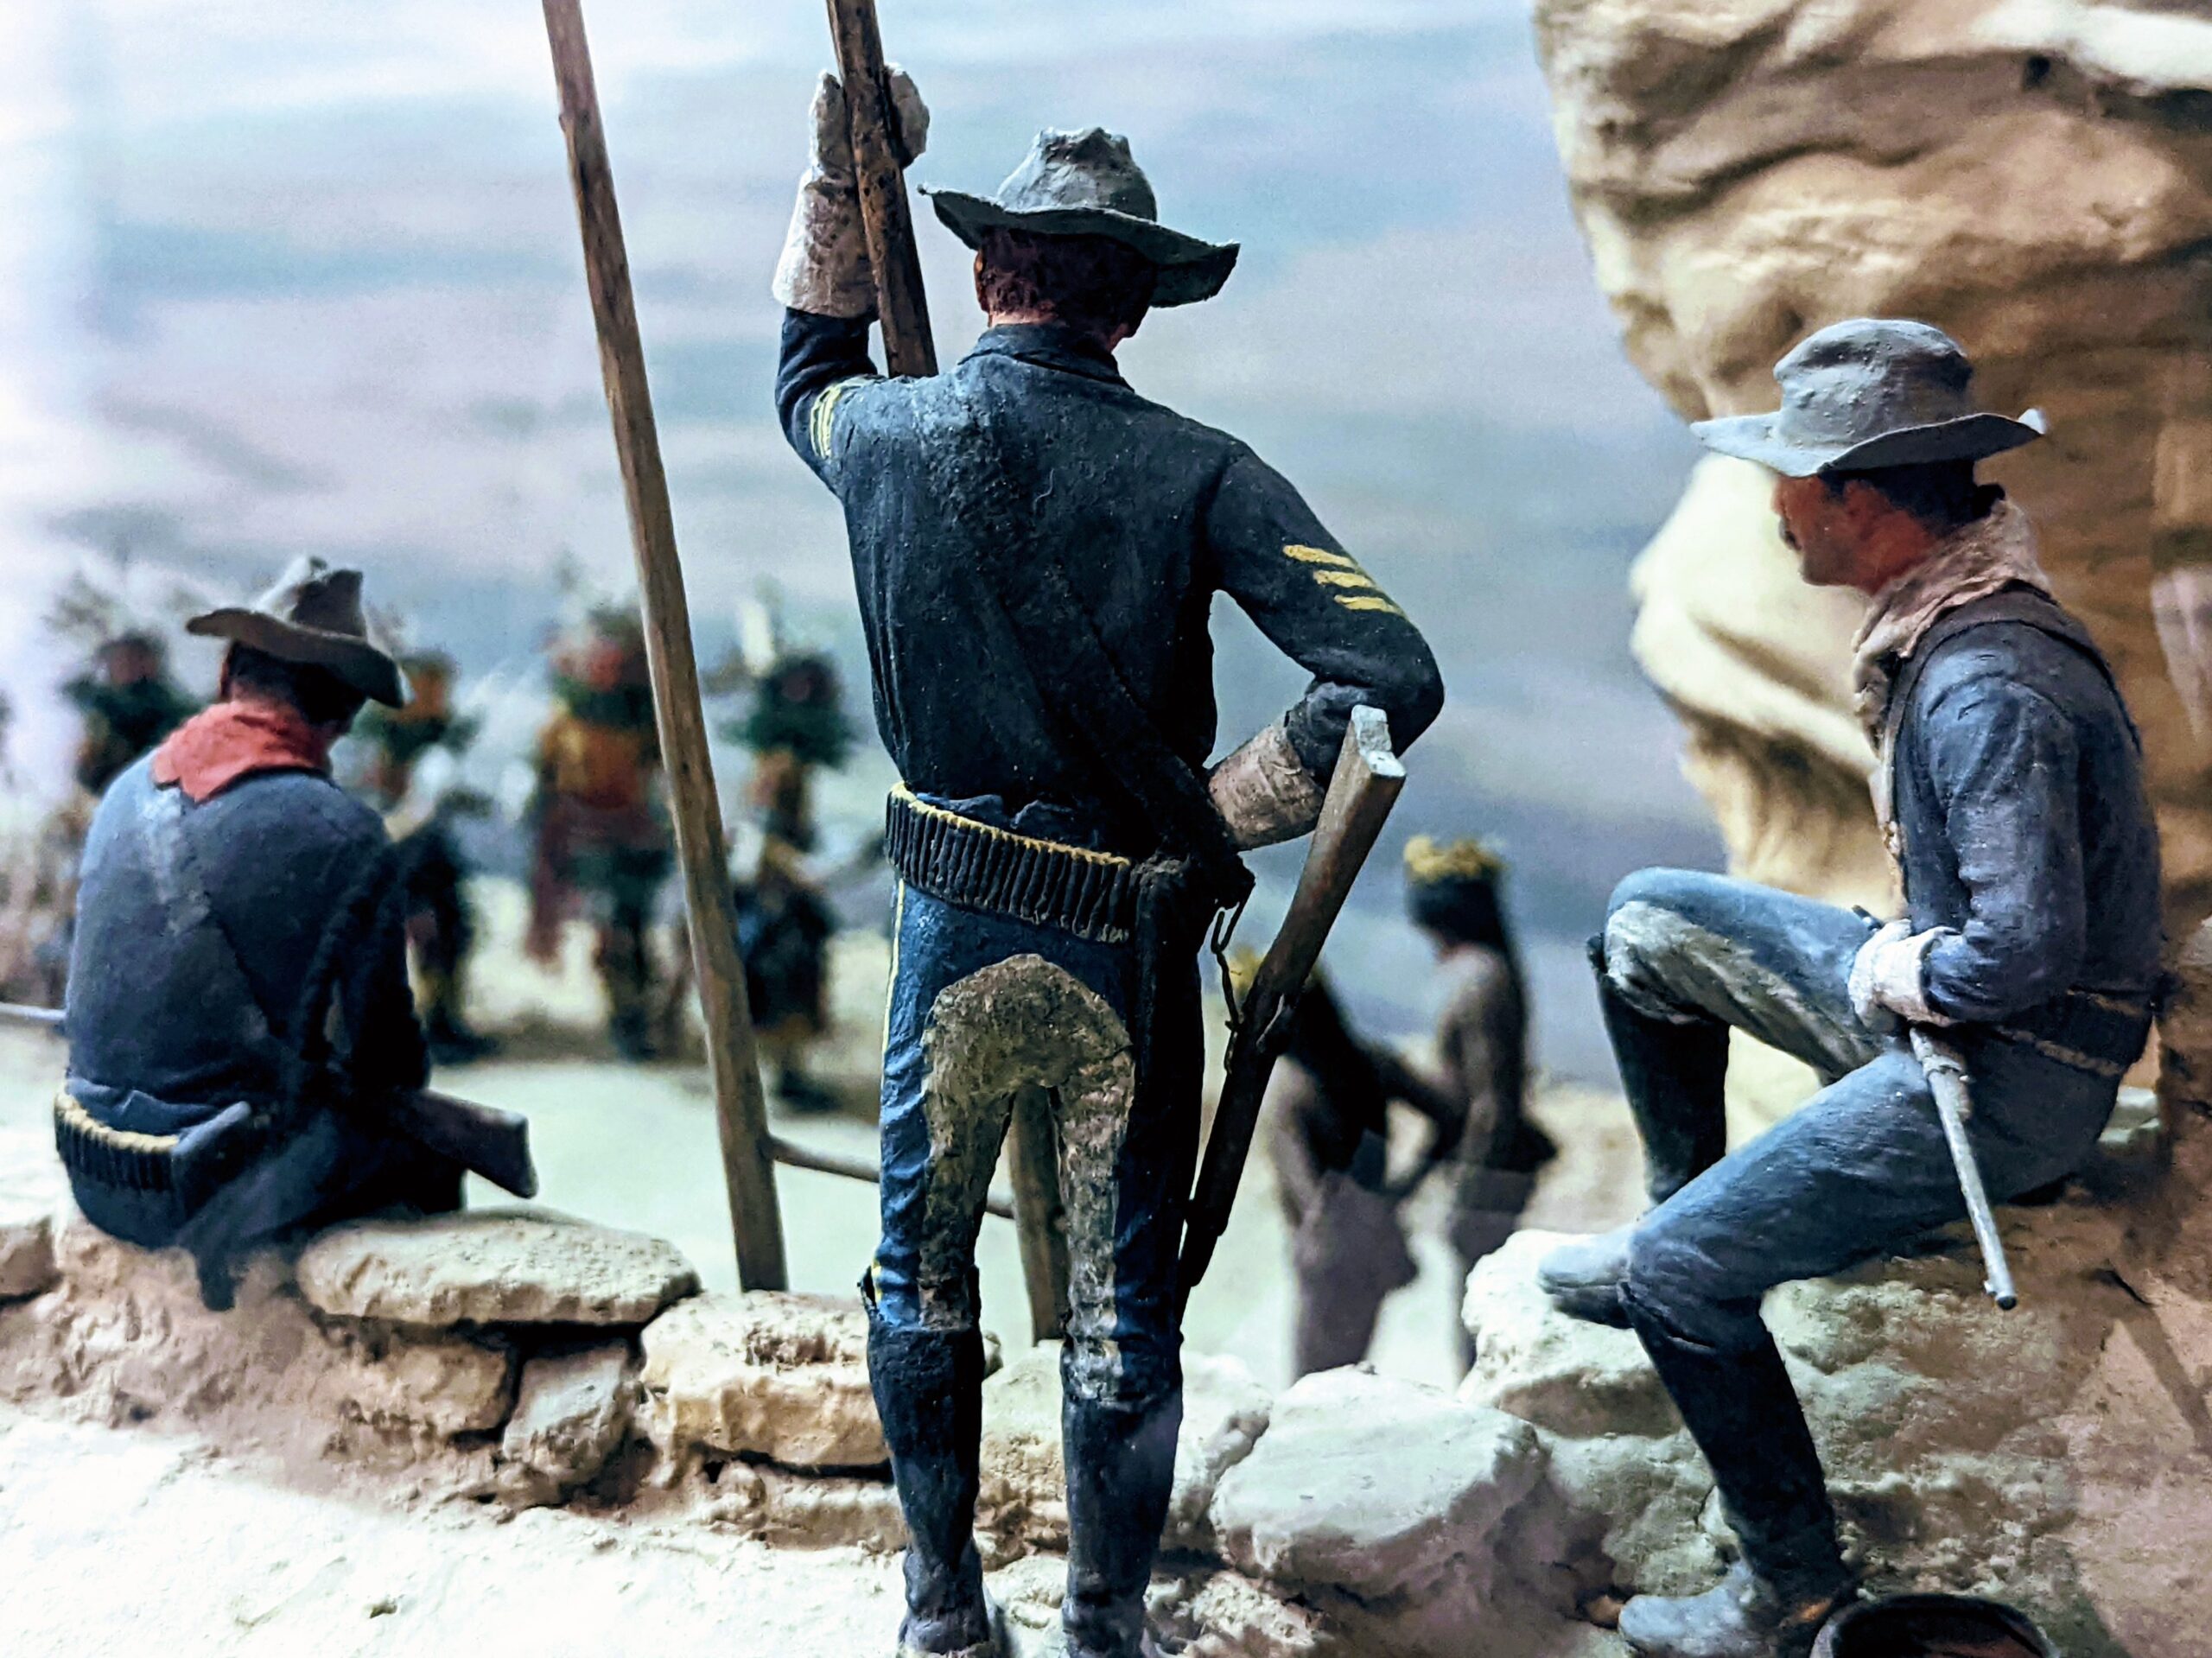 Three men in US Cavalry uniforms, seated and standing in a rocky landscape, watch a group of Native Americans just beyond